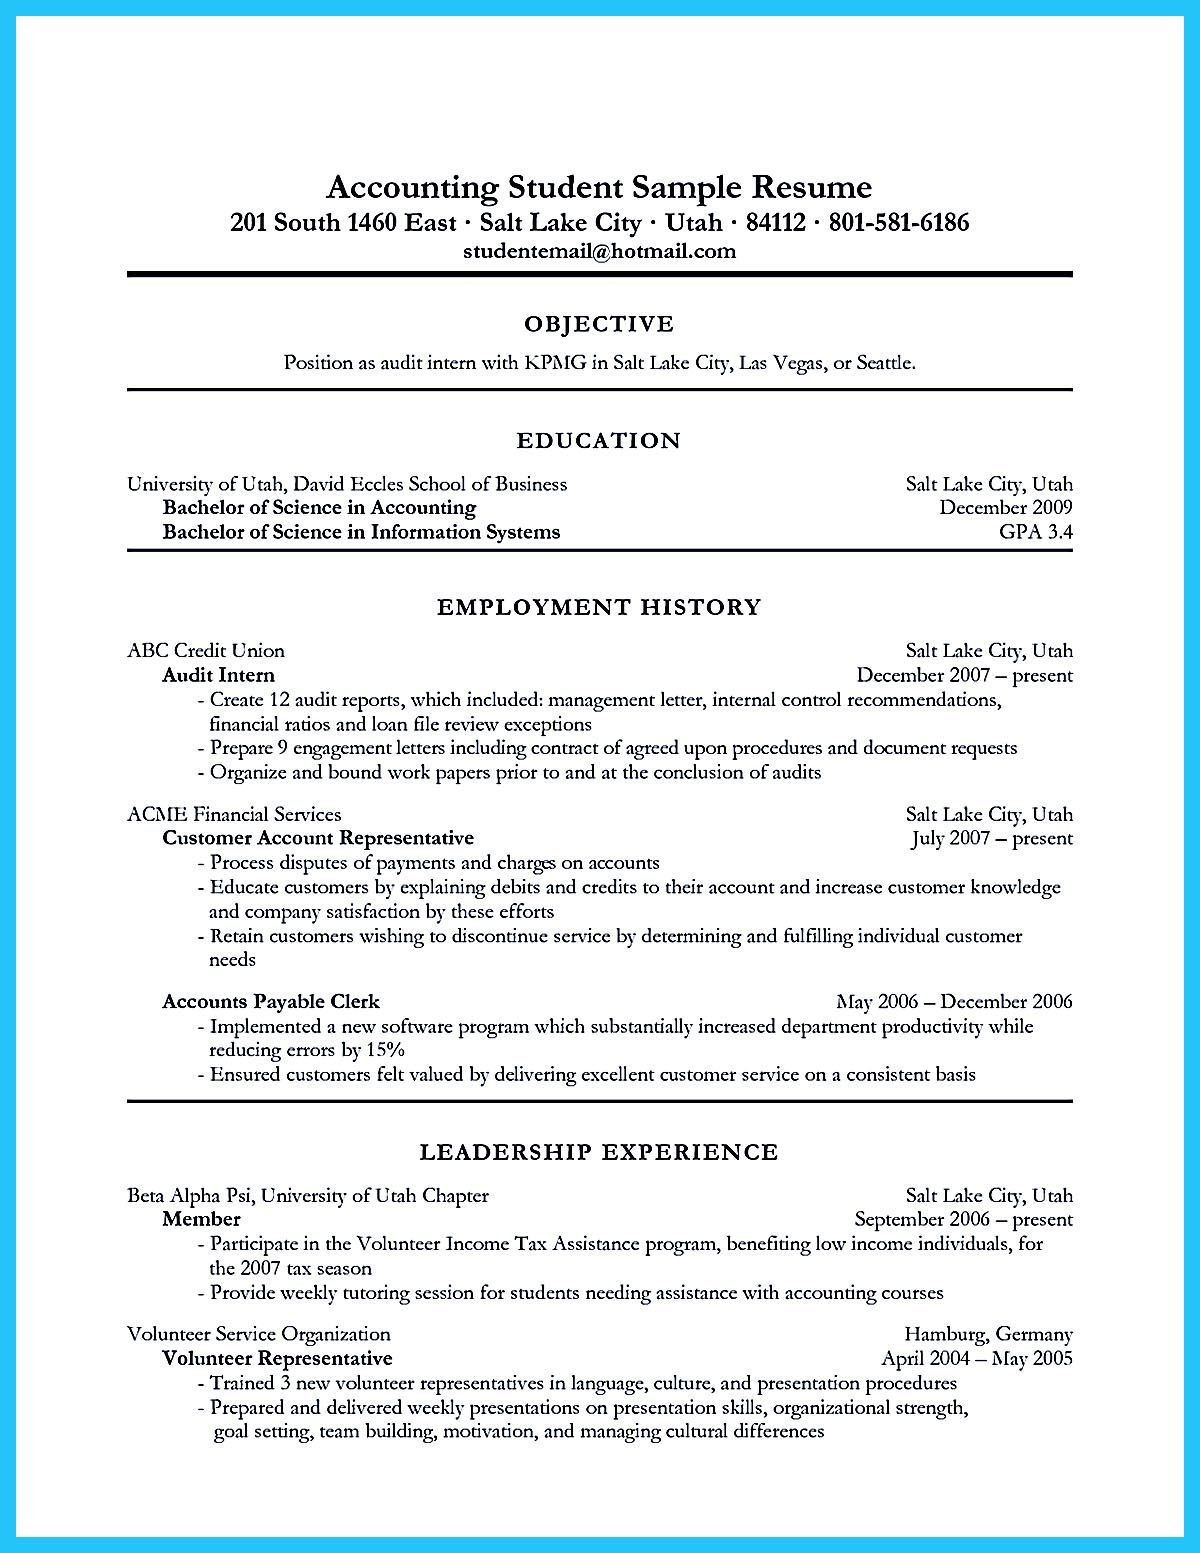 Sample Objective for Resume College Student Awesome Accounting Student Resume with No Experience Resume …